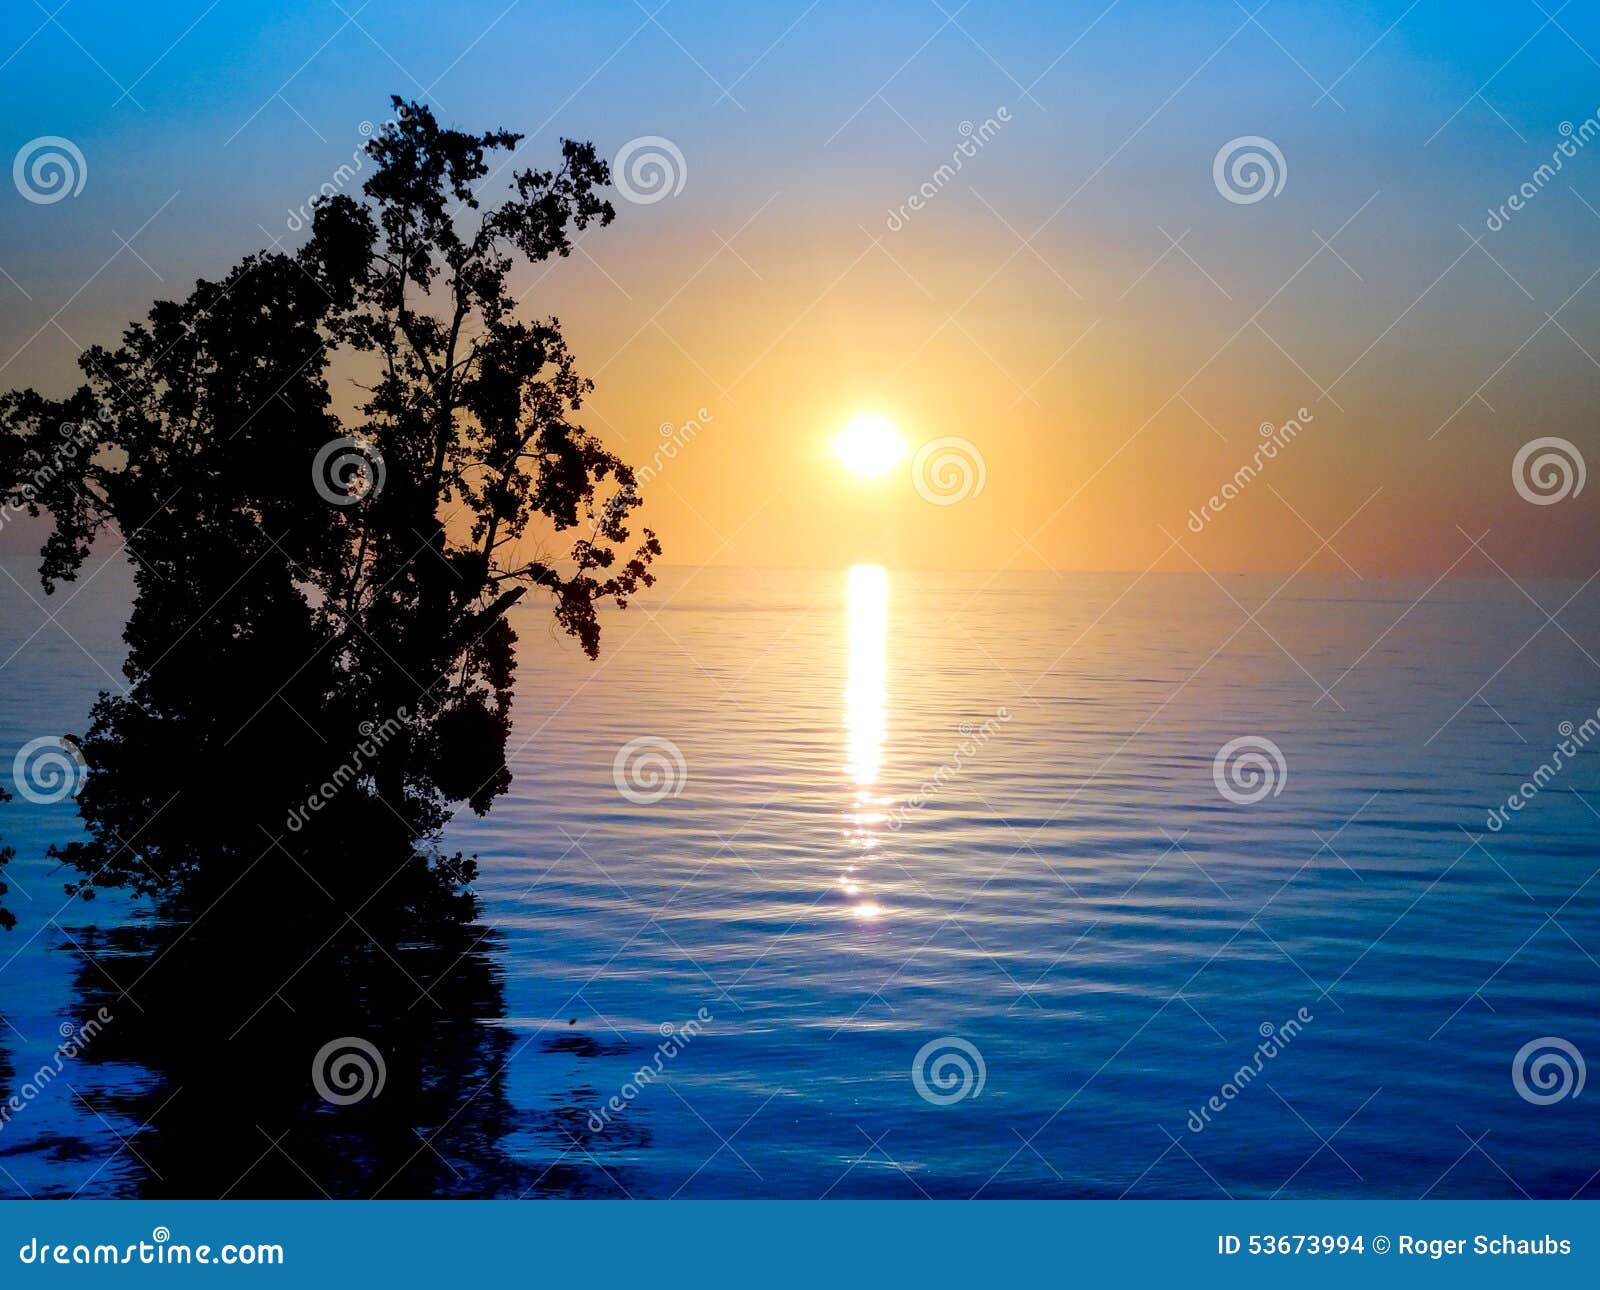 sunset over sea with mangroves